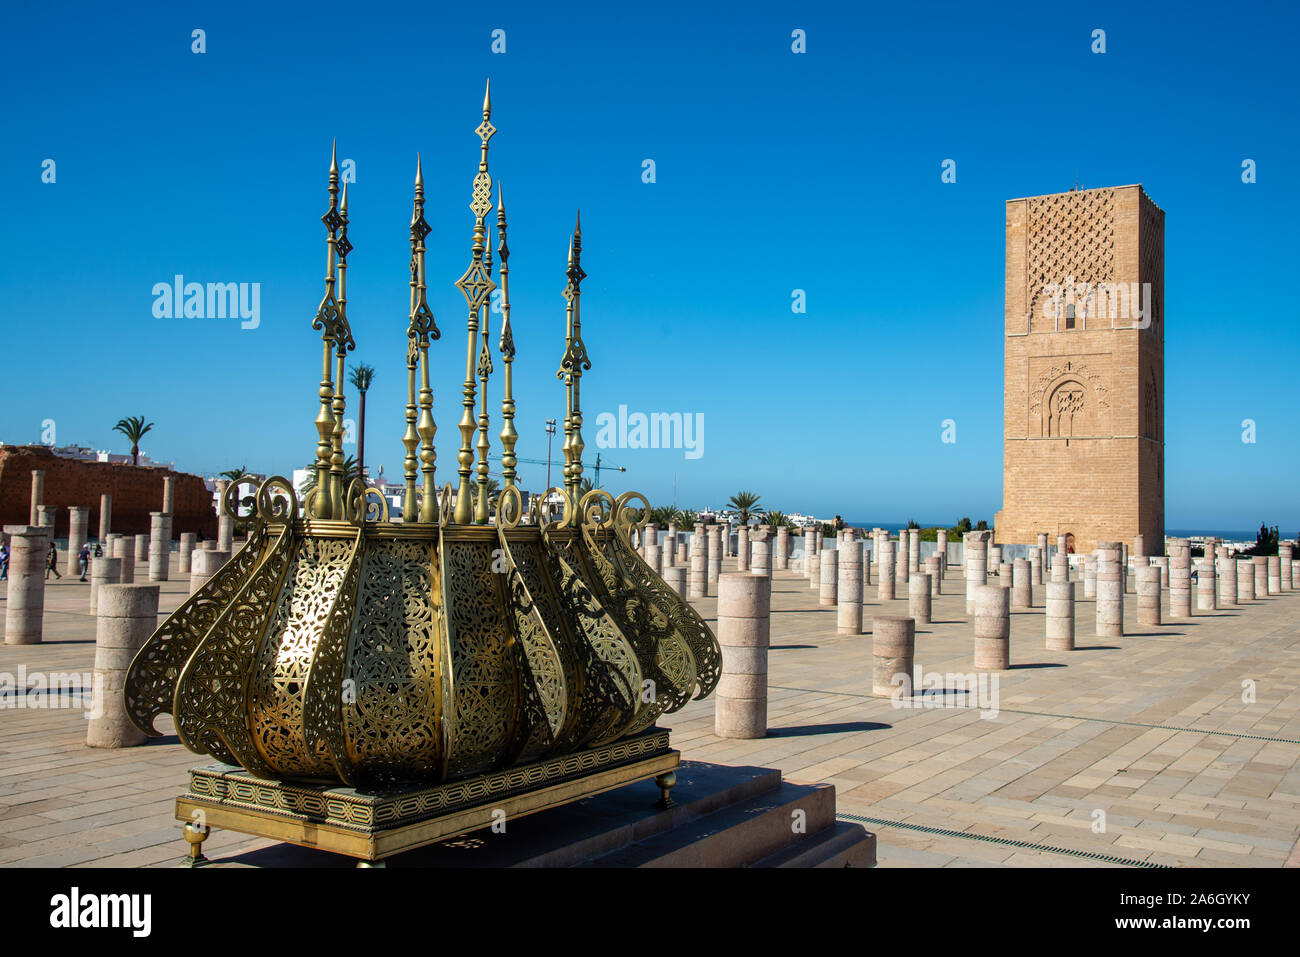 old Hassan tower in Rabat, Morocco Stock Photo